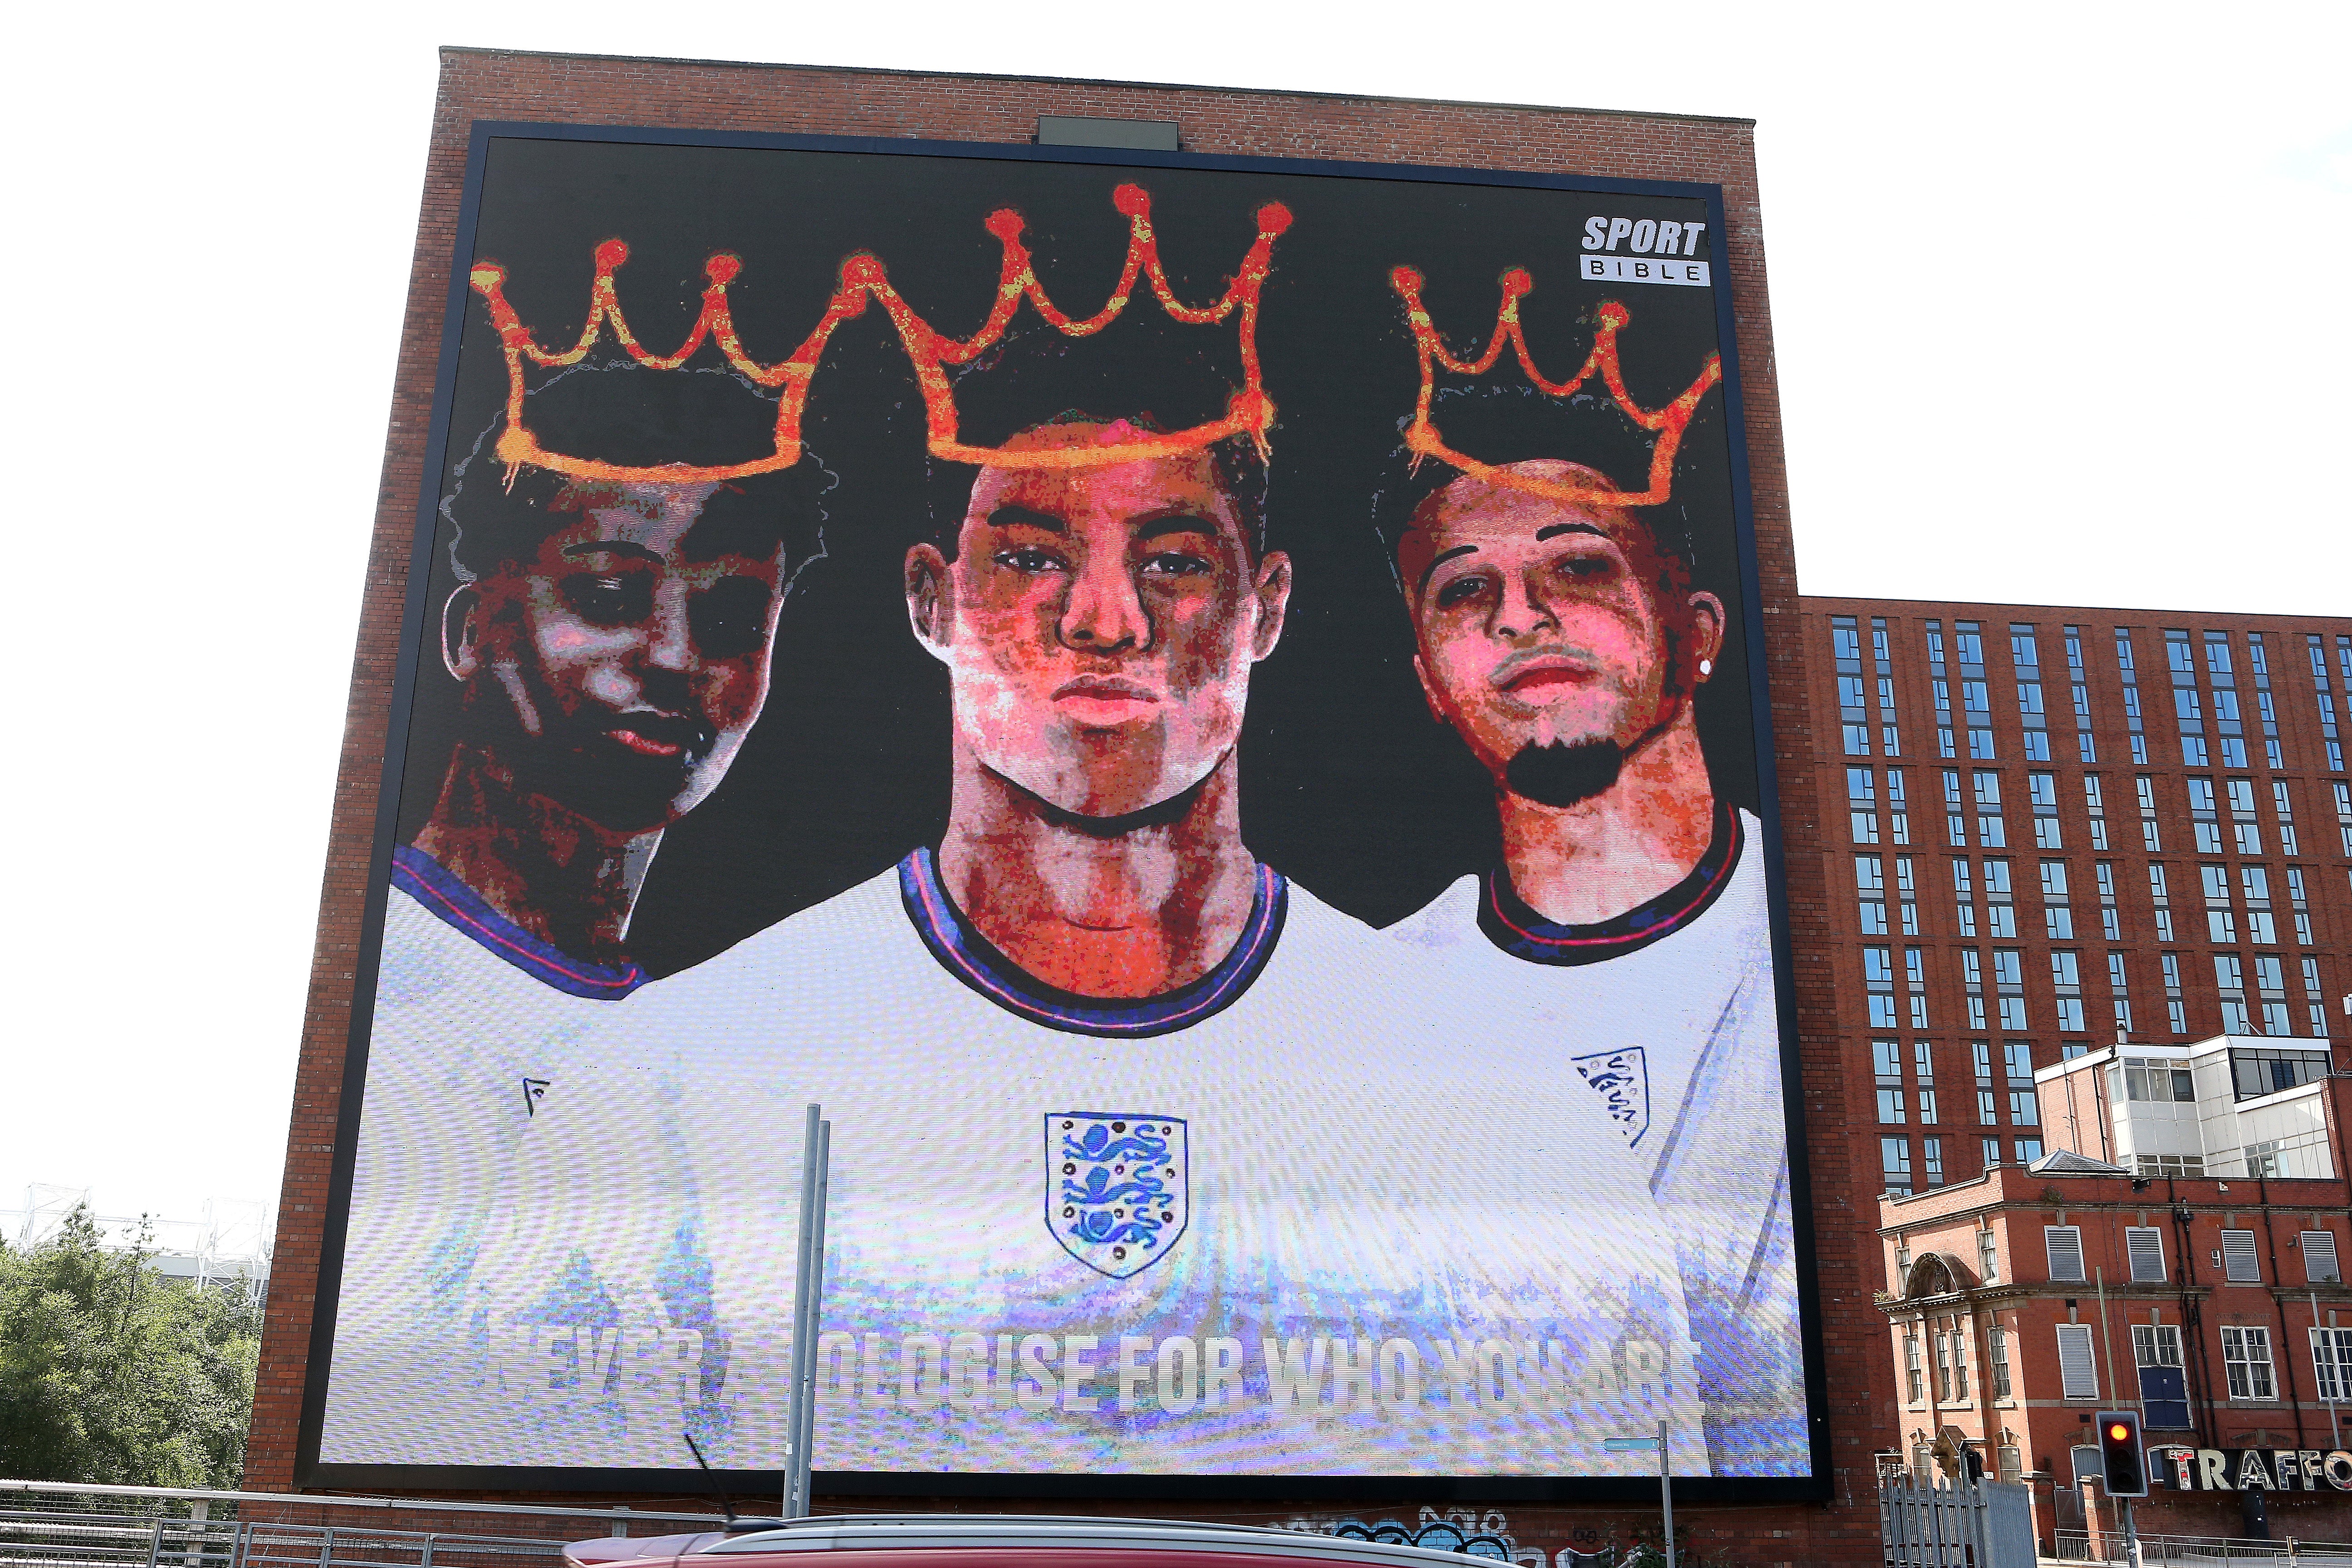 A giant mural in support of the three England footballers Marcus Rashford, Jadon Sancho and Bukayo Saka has been unveiled in Manchester